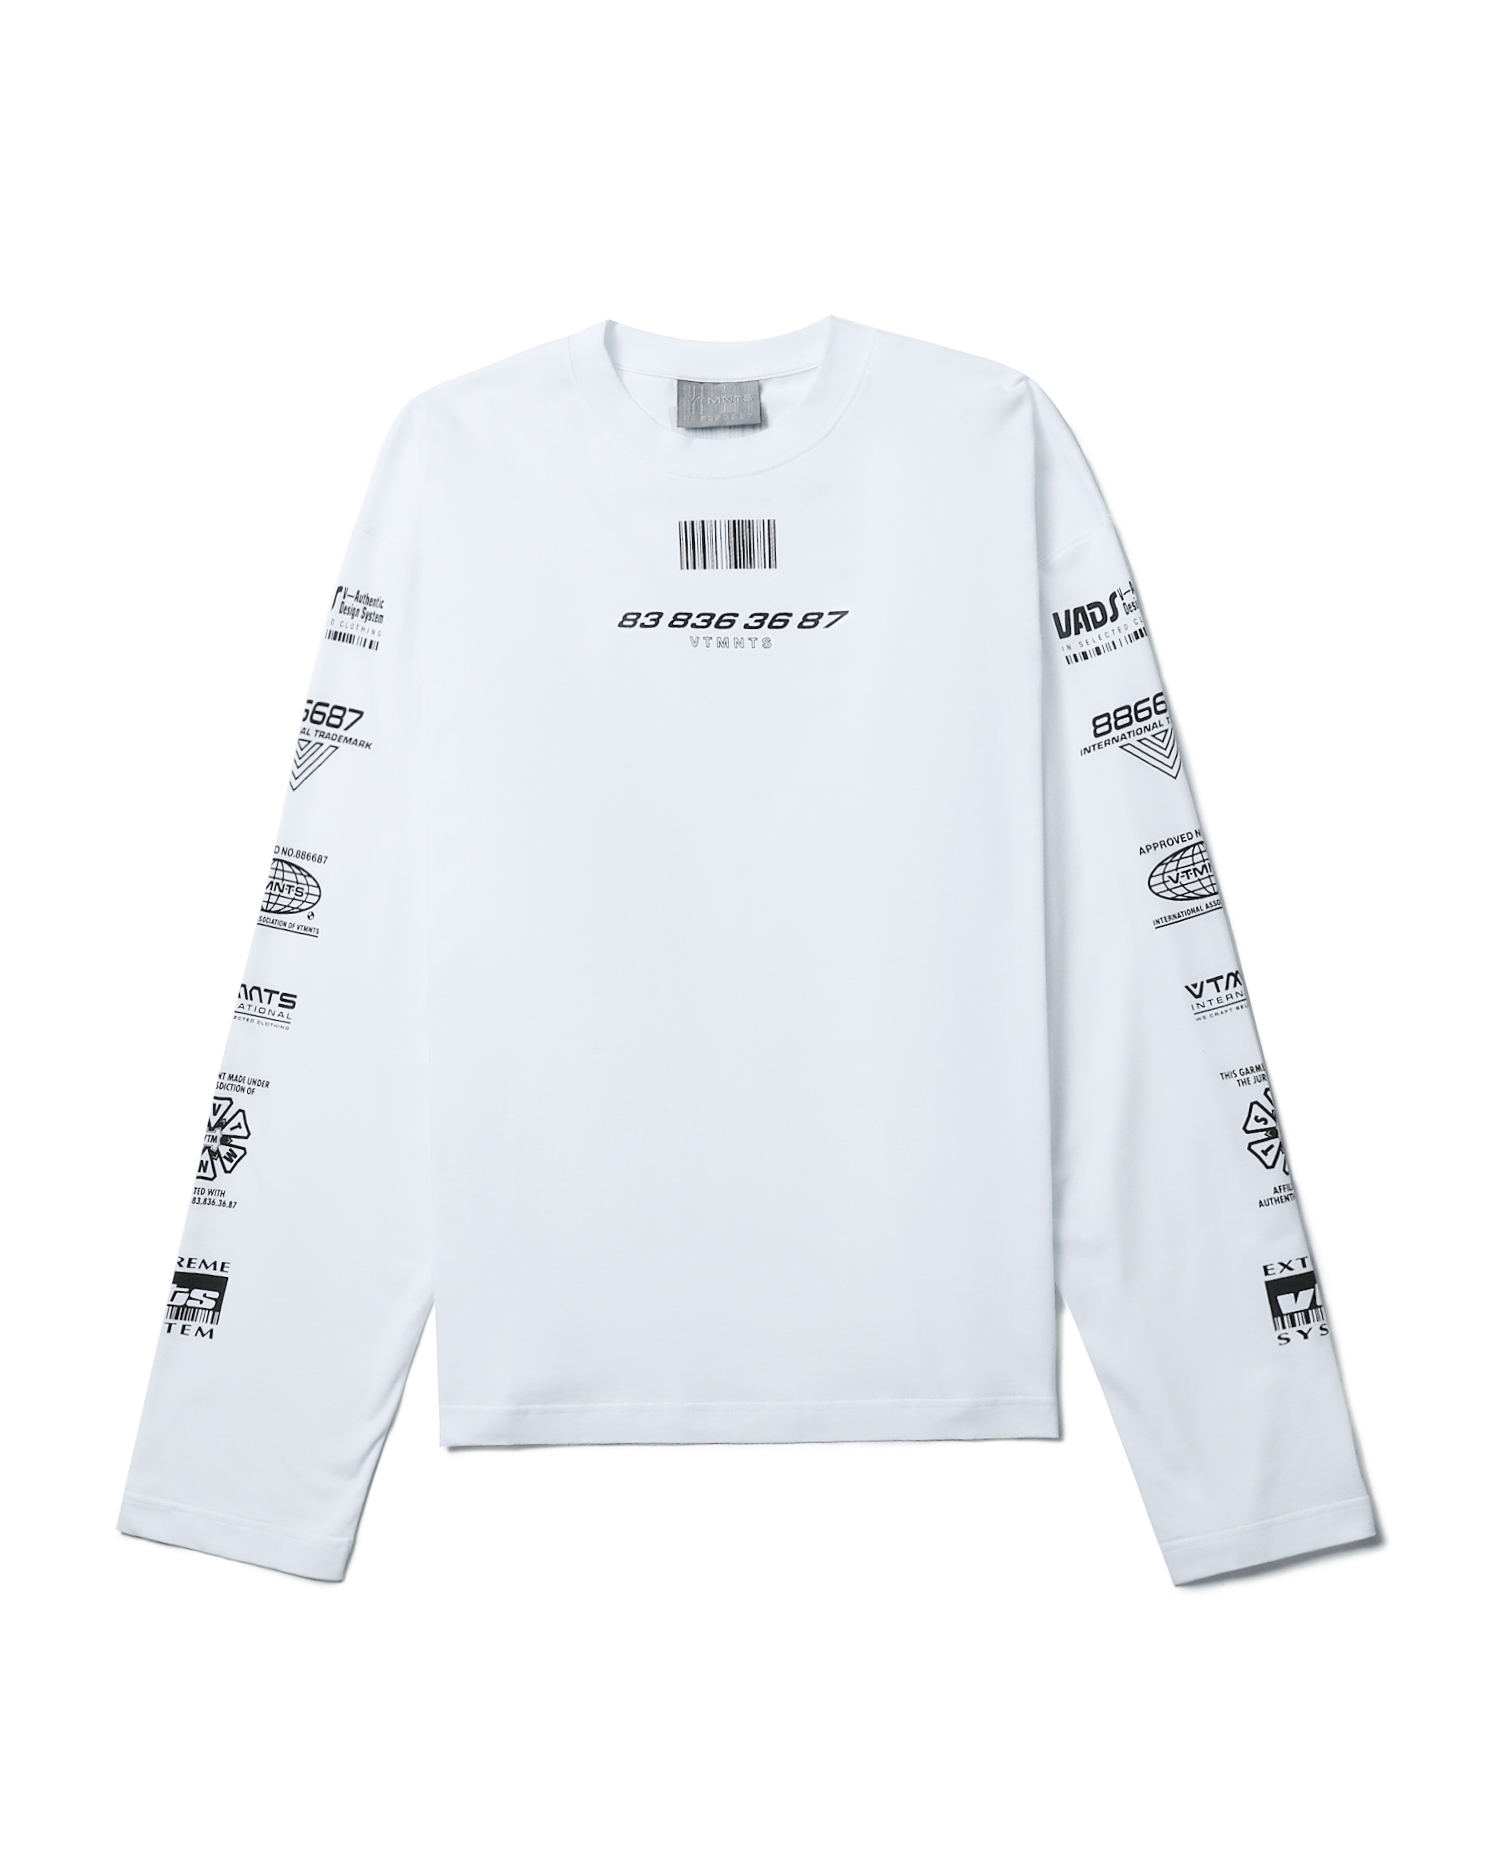 All rights reserved L/S tee